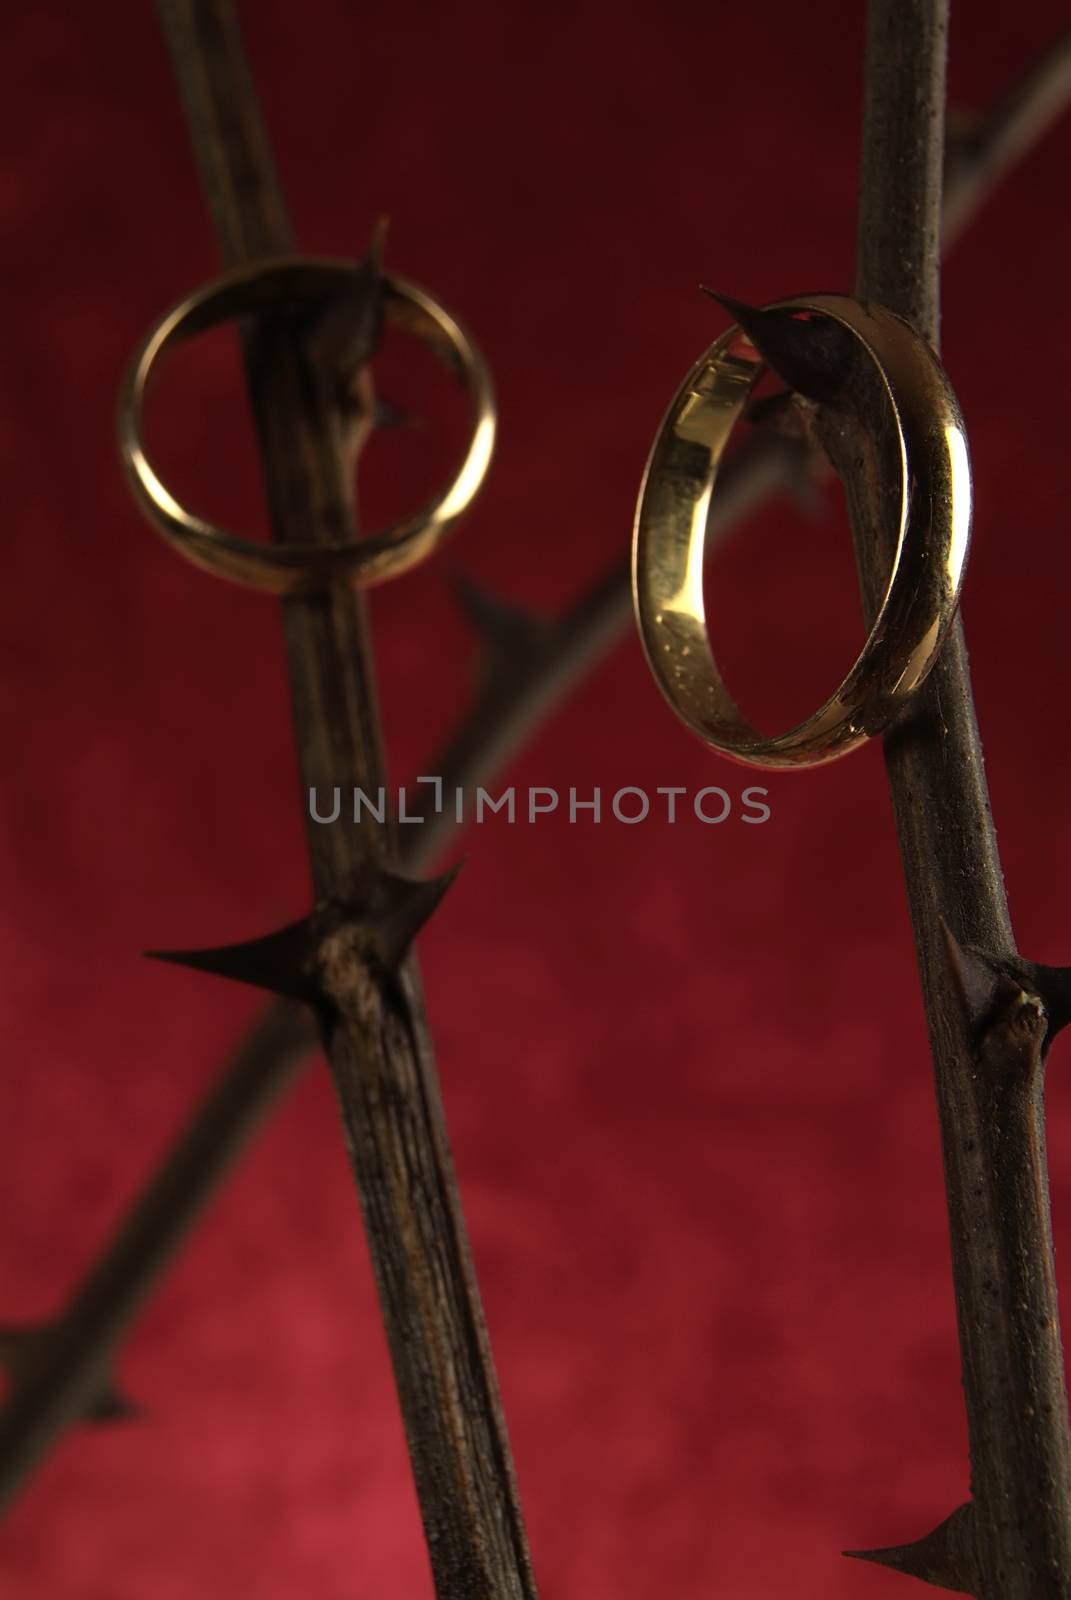 Wedding rings hanging on the thorns of a rose by romeocharly